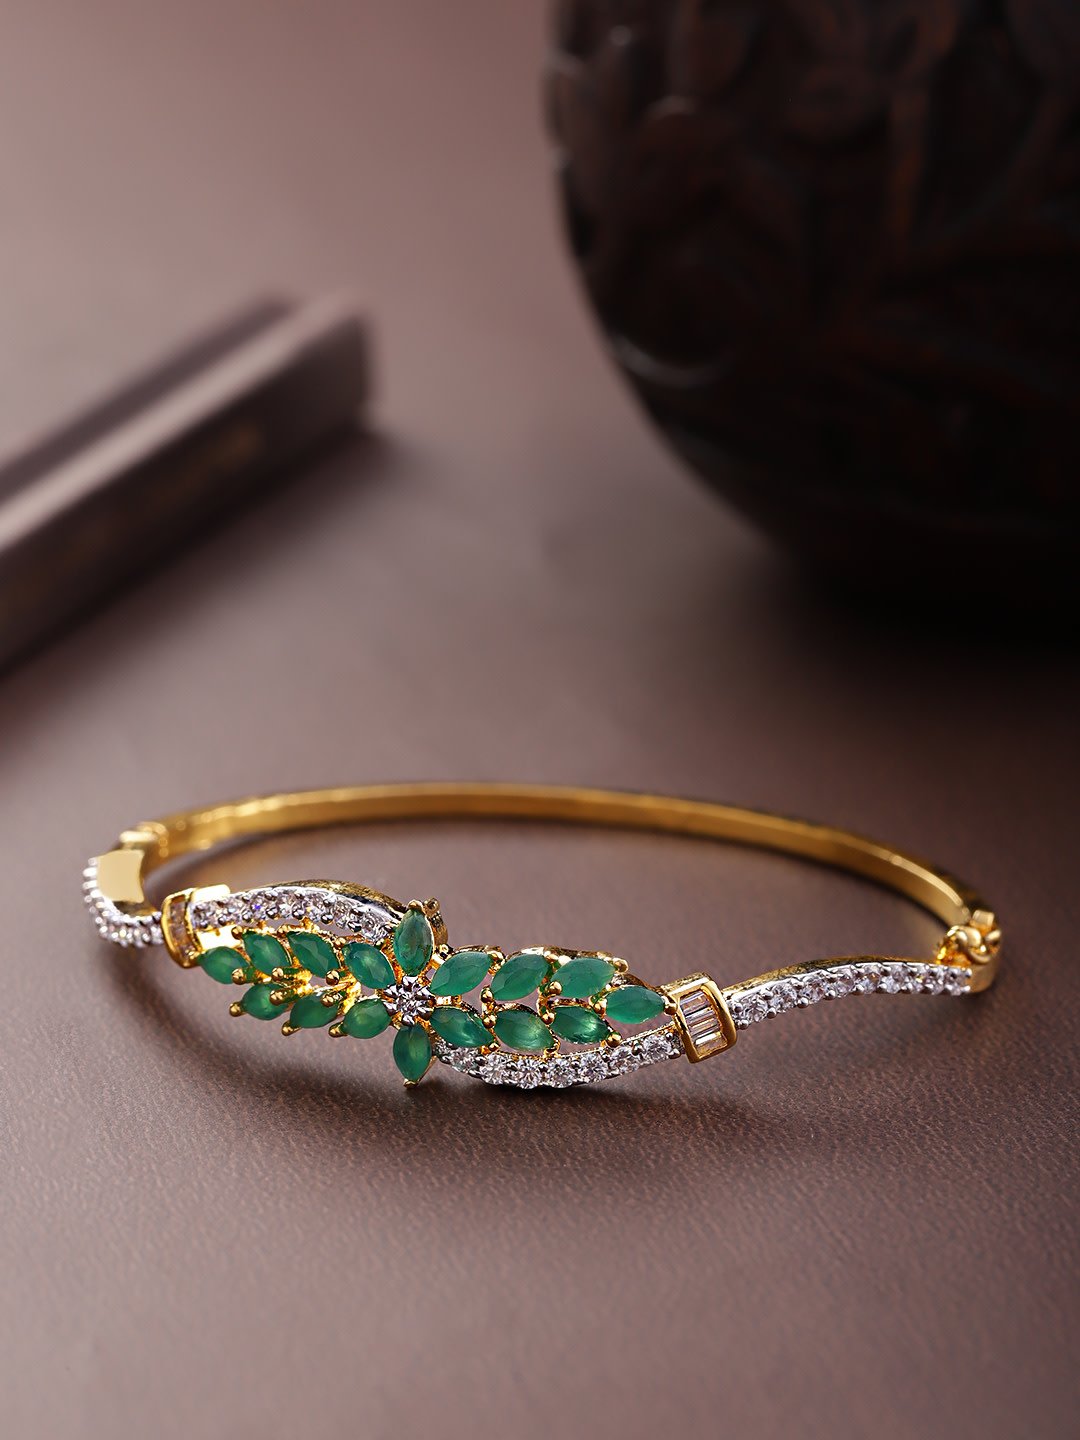 Women's Gold-Plated American Diamond and Emerald Studded, Floral Patterned Bracelet in Green Color - Priyaasi